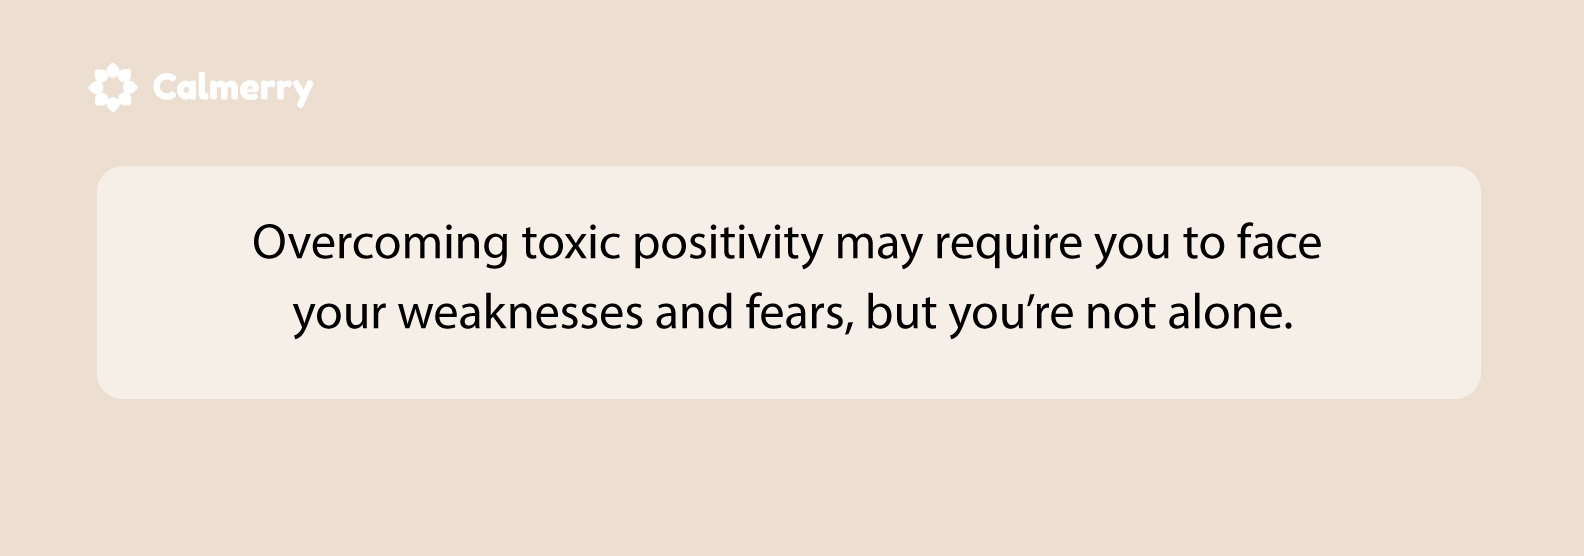 To overcome toxic positivity, you may need to face your fears